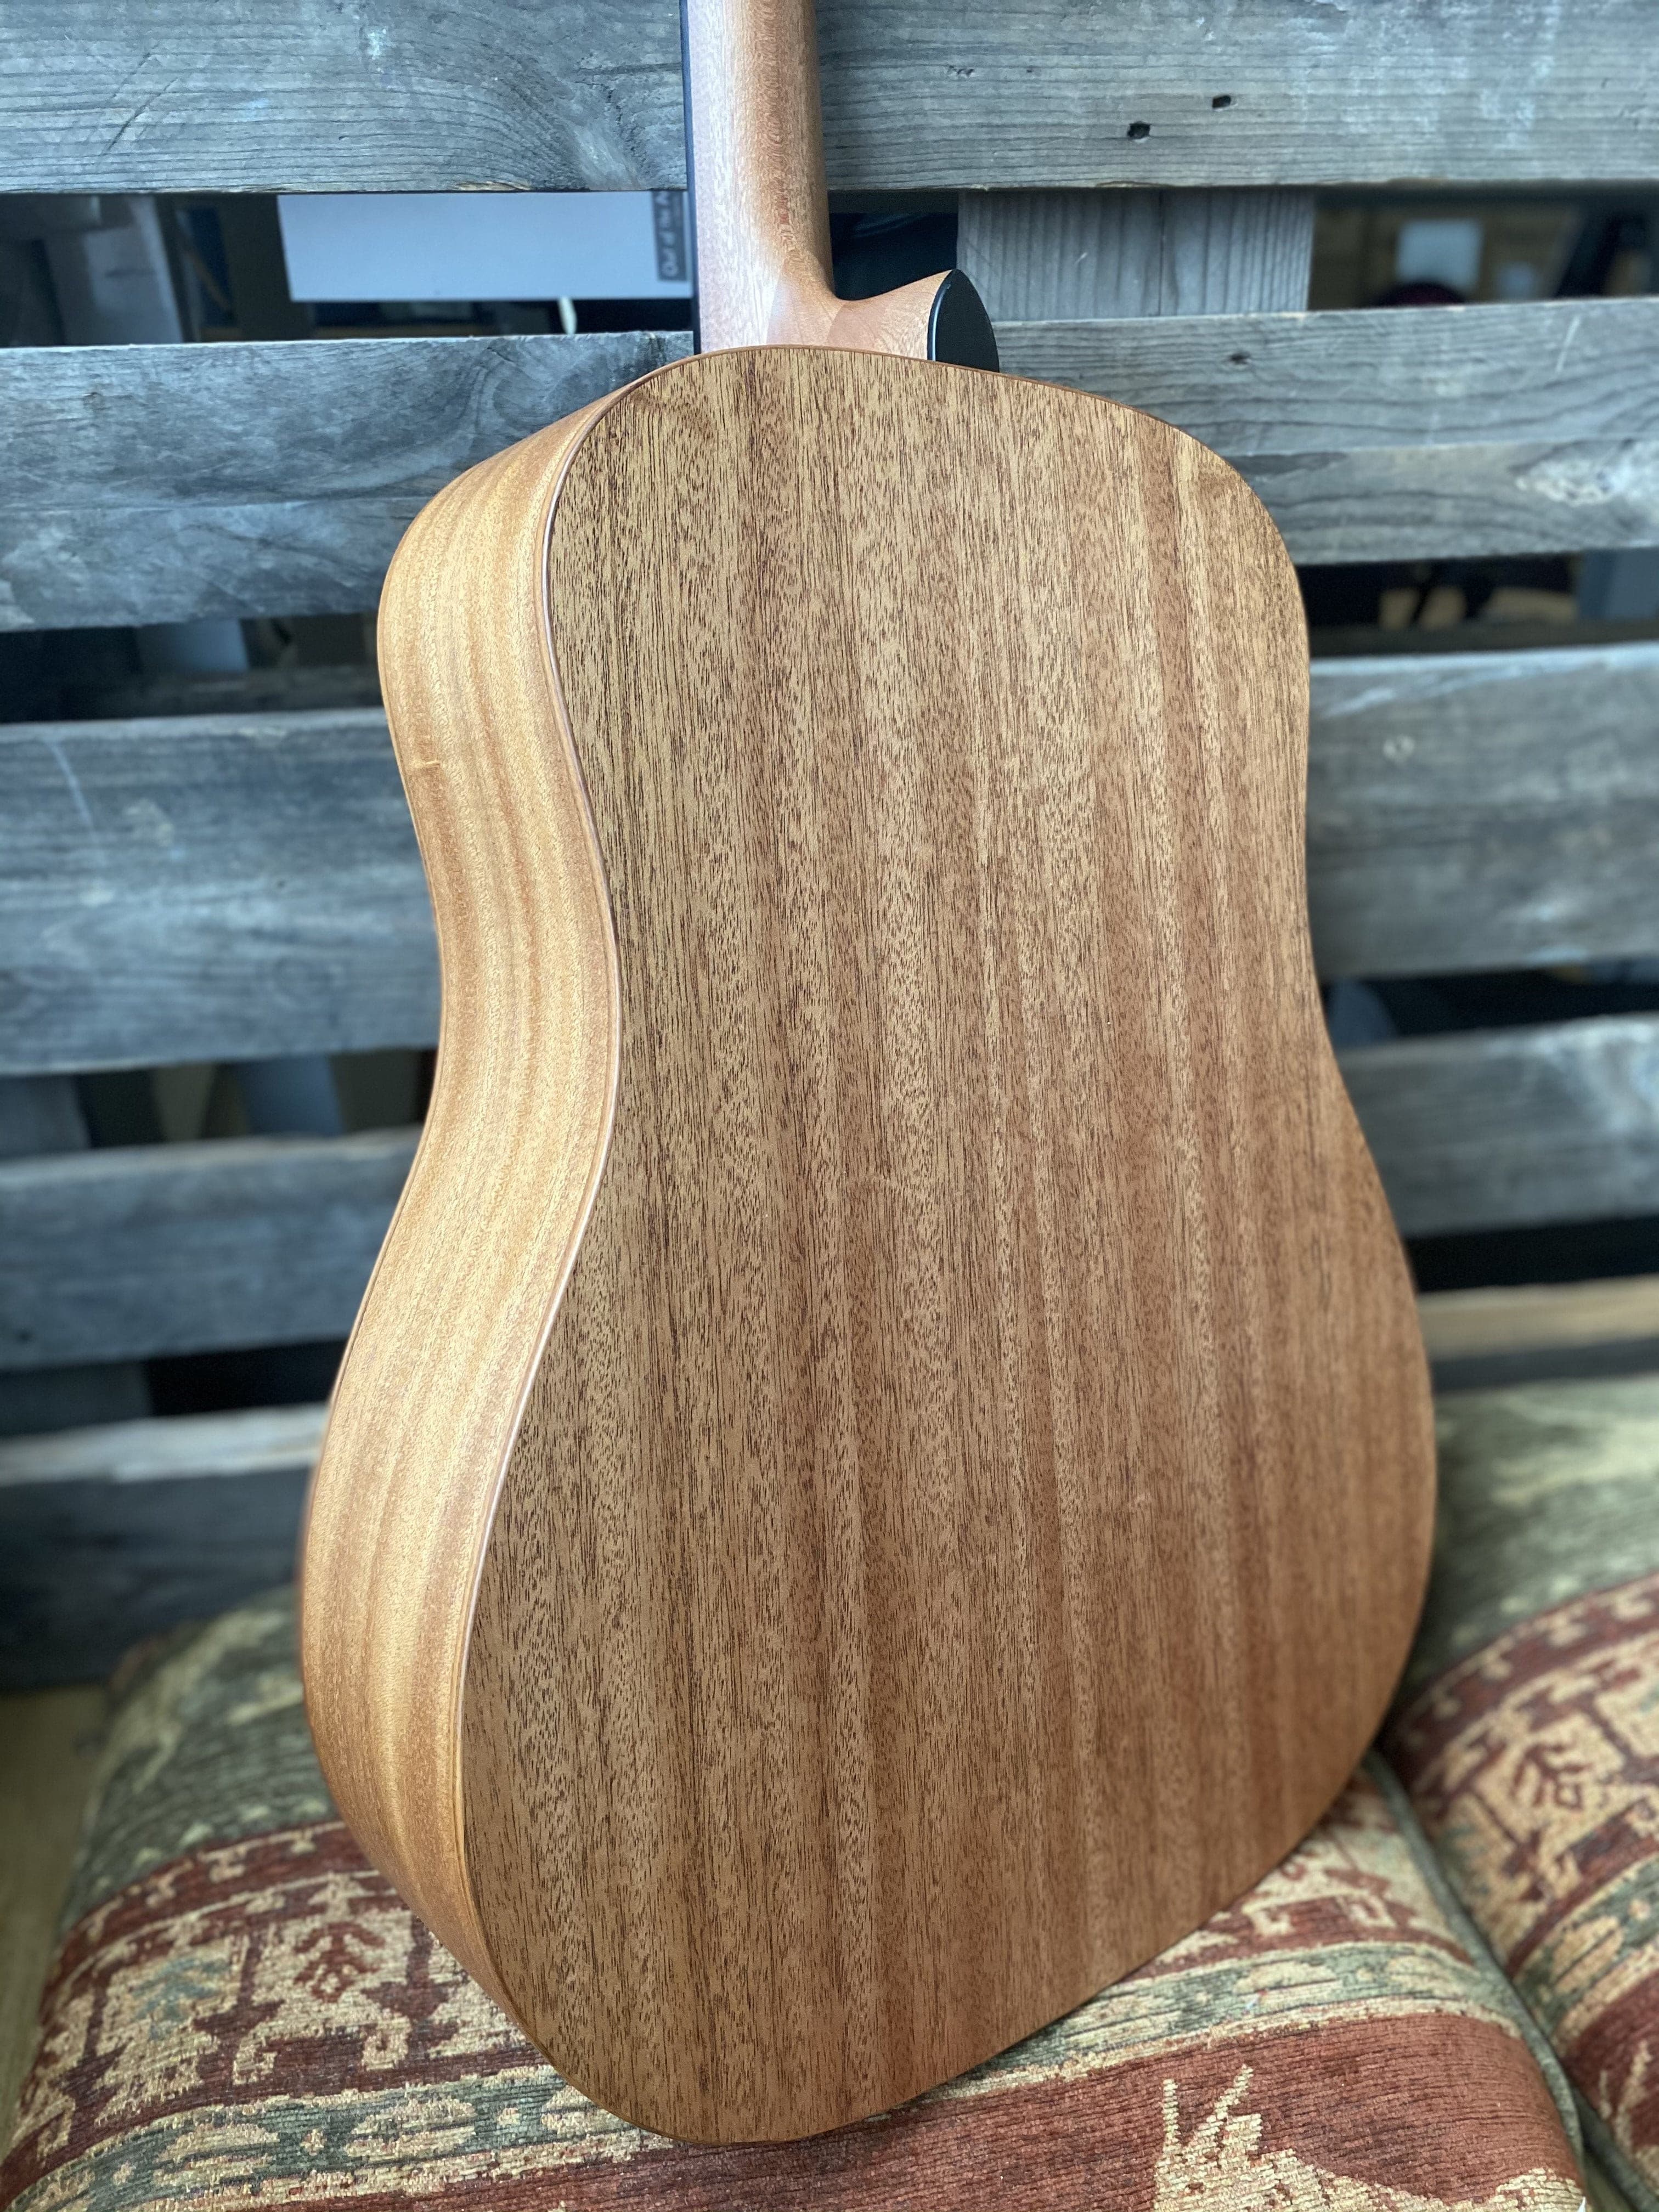 Dowina Pure Dreadnought 100% Handmade Custom Shop Acoustic Guitar From Slovakia, Acoustic Guitar for sale at Richards Guitars.